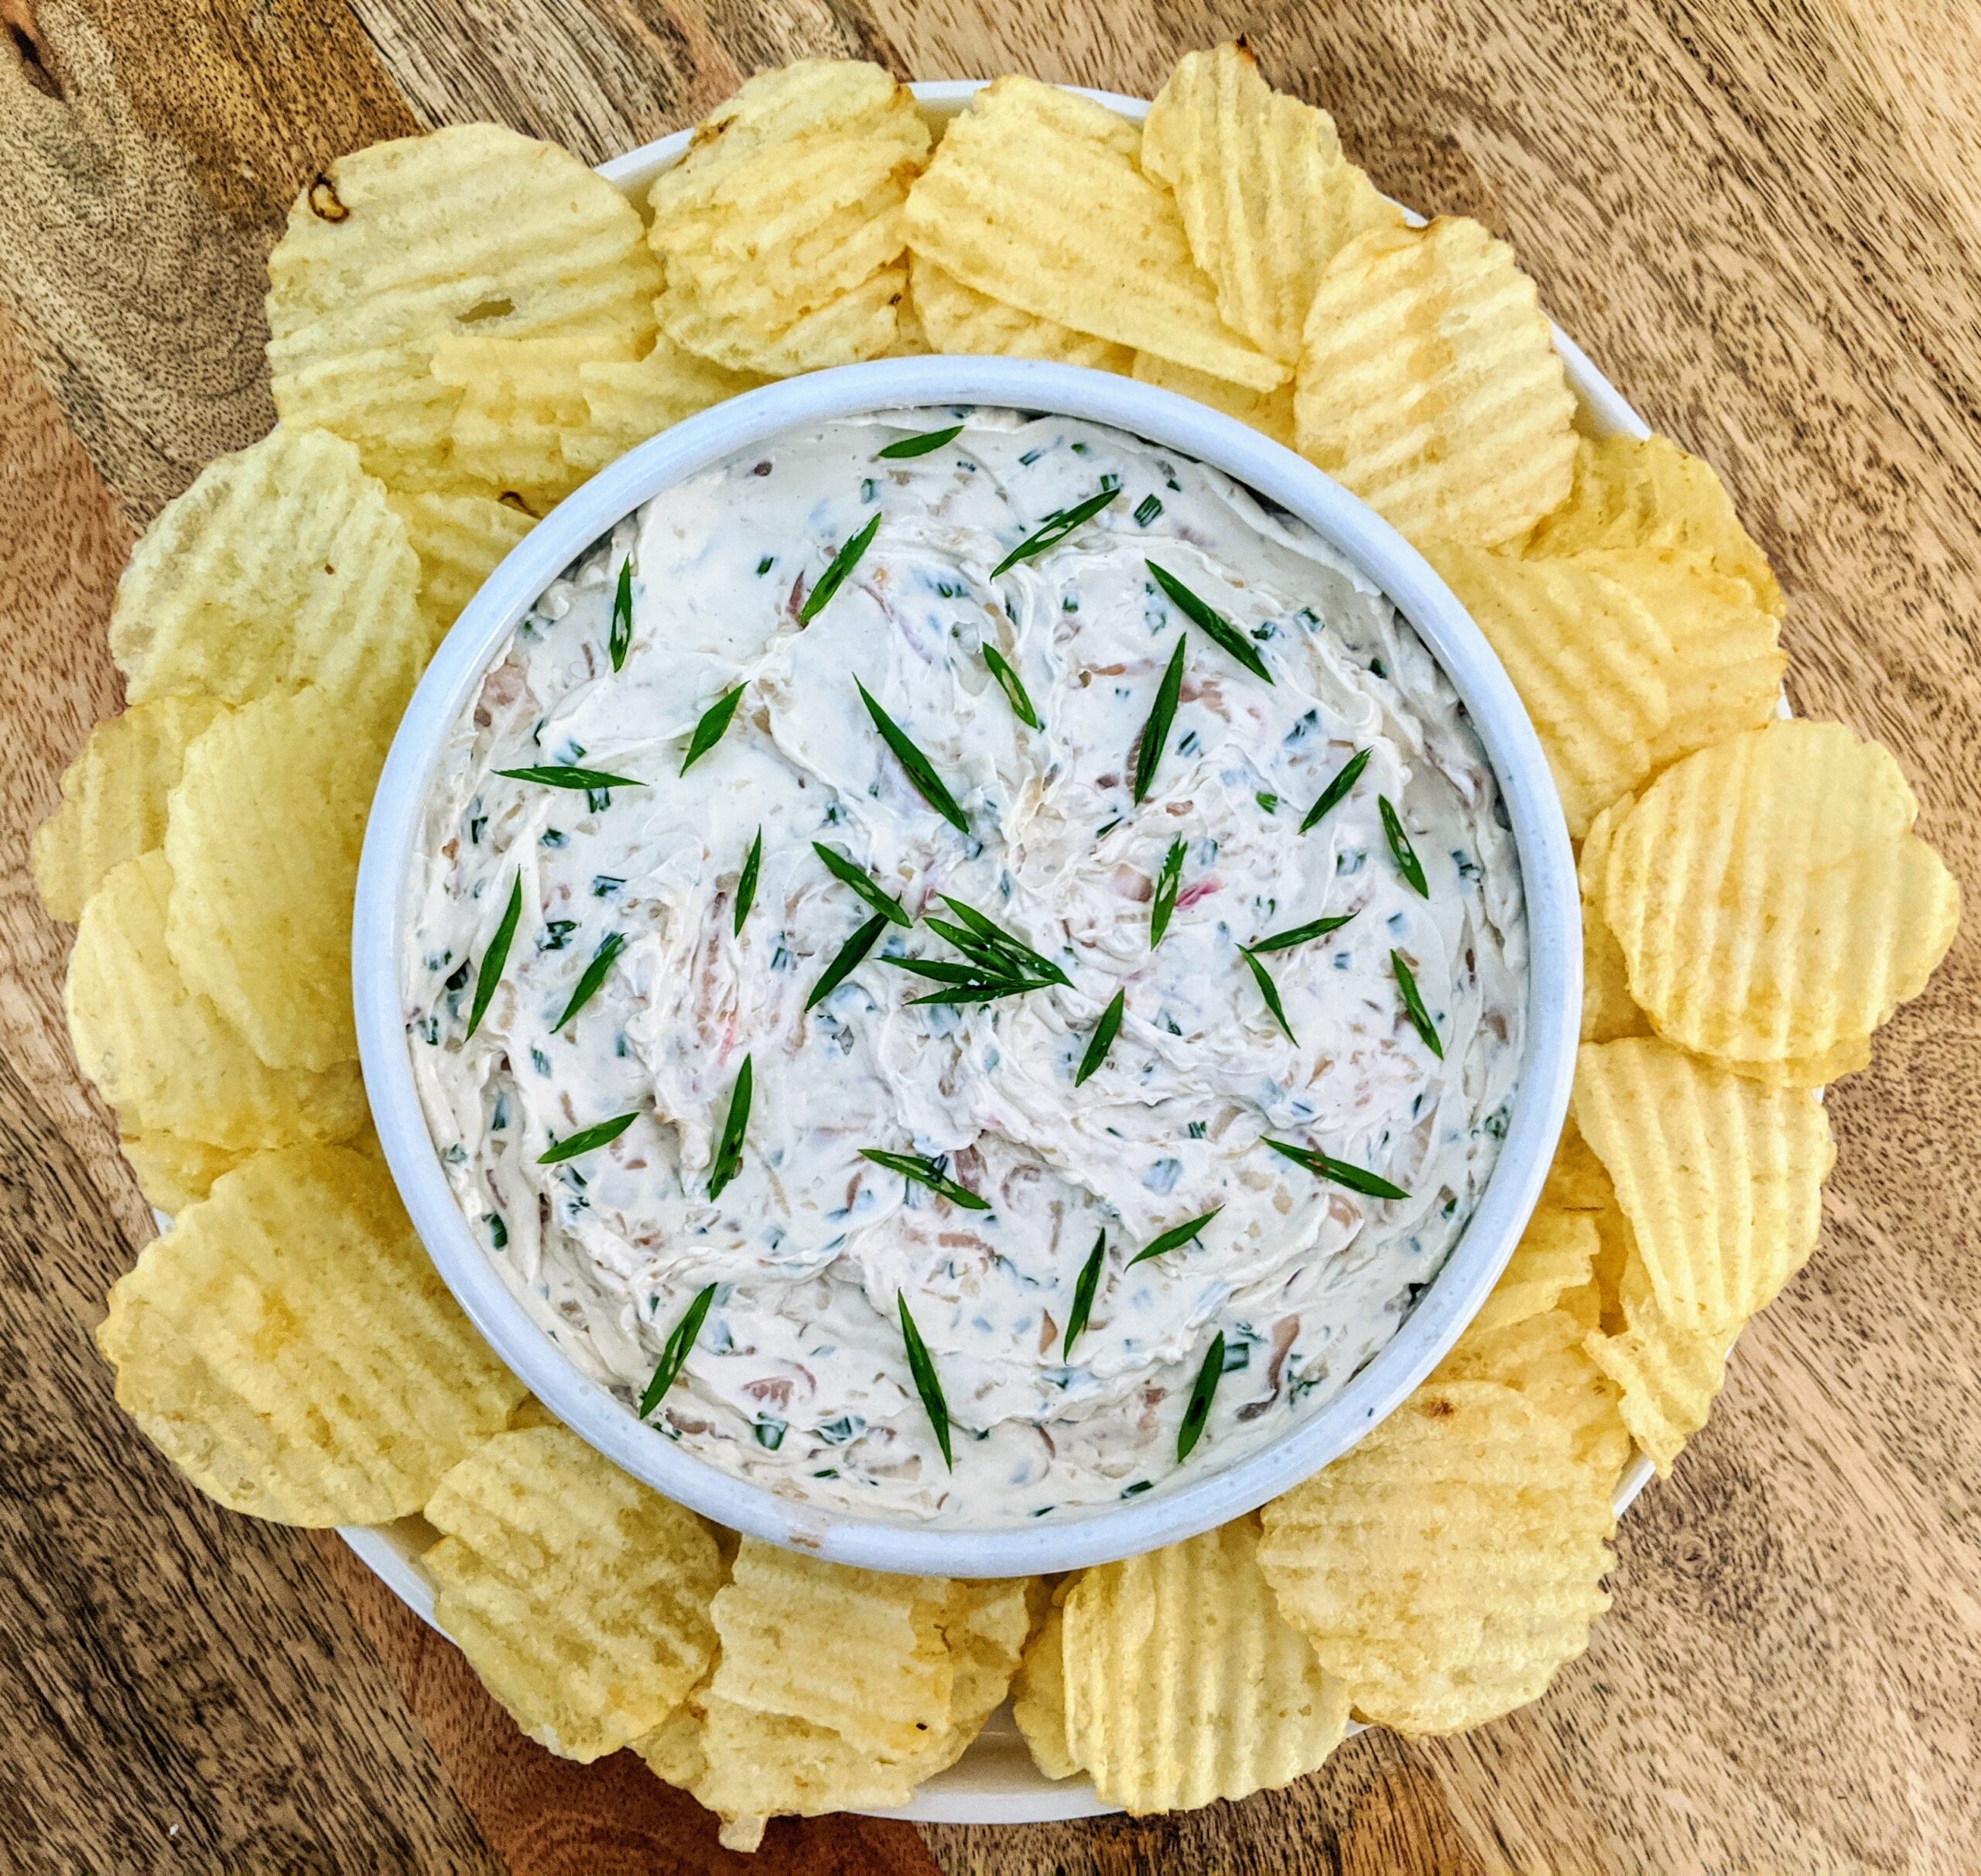 A bowl of caramelized shallot and chive dip, garnished with sliced chives and a sprig of dill. Served in the center of a plate and surrounded by wavy original potato chips.